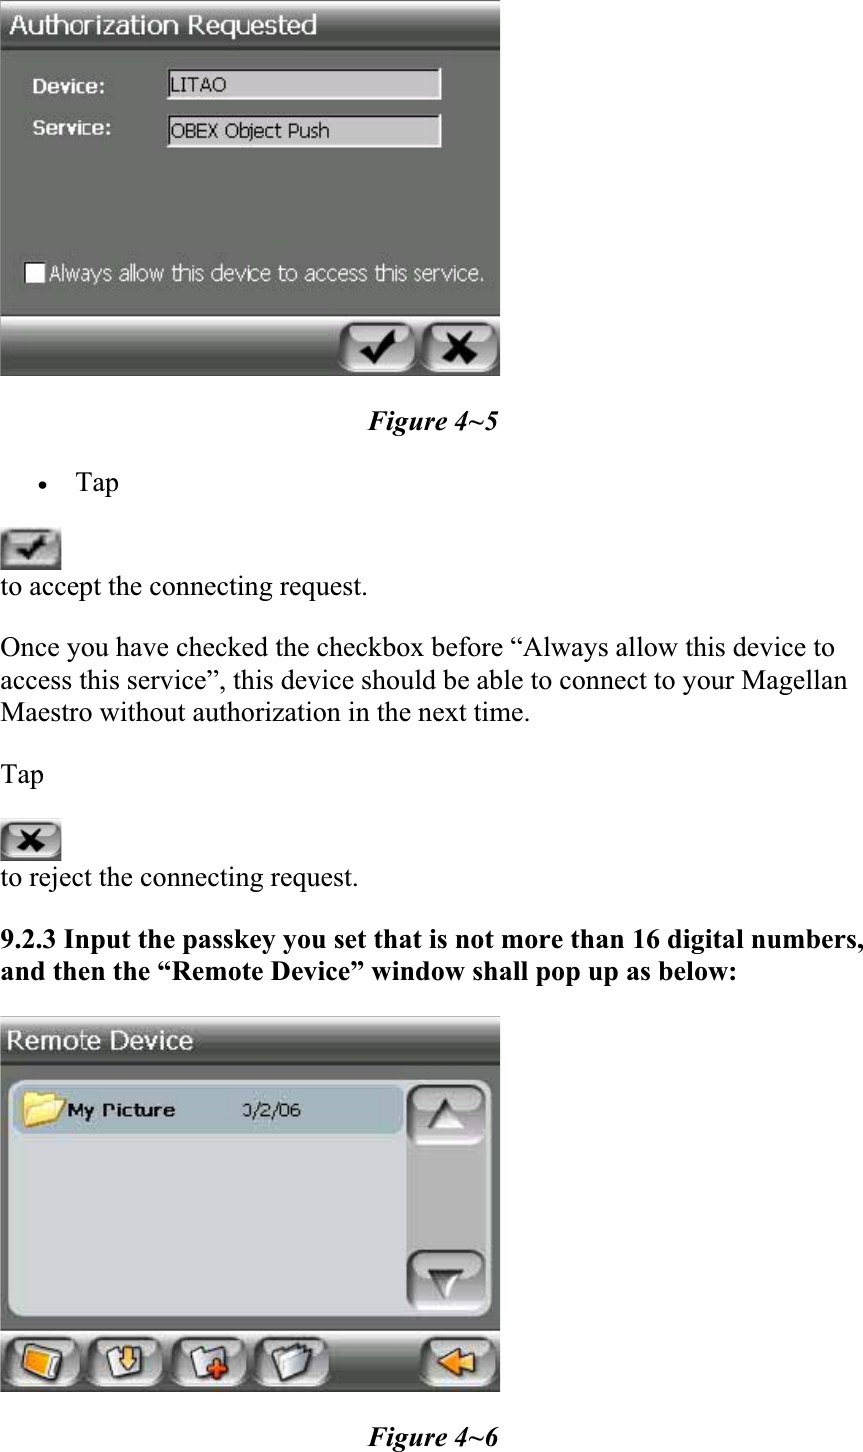 Figure 4~5 xTapto accept the connecting request.  Once you have checked the checkbox before “Always allow this device to access this service”, this device should be able to connect to your Magellan Maestro without authorization in the next time.  Tapto reject the connecting request.  9.2.3 Input the passkey you set that is not more than 16 digital numbers, and then the “Remote Device” window shall pop up as below:  Figure 4~6 